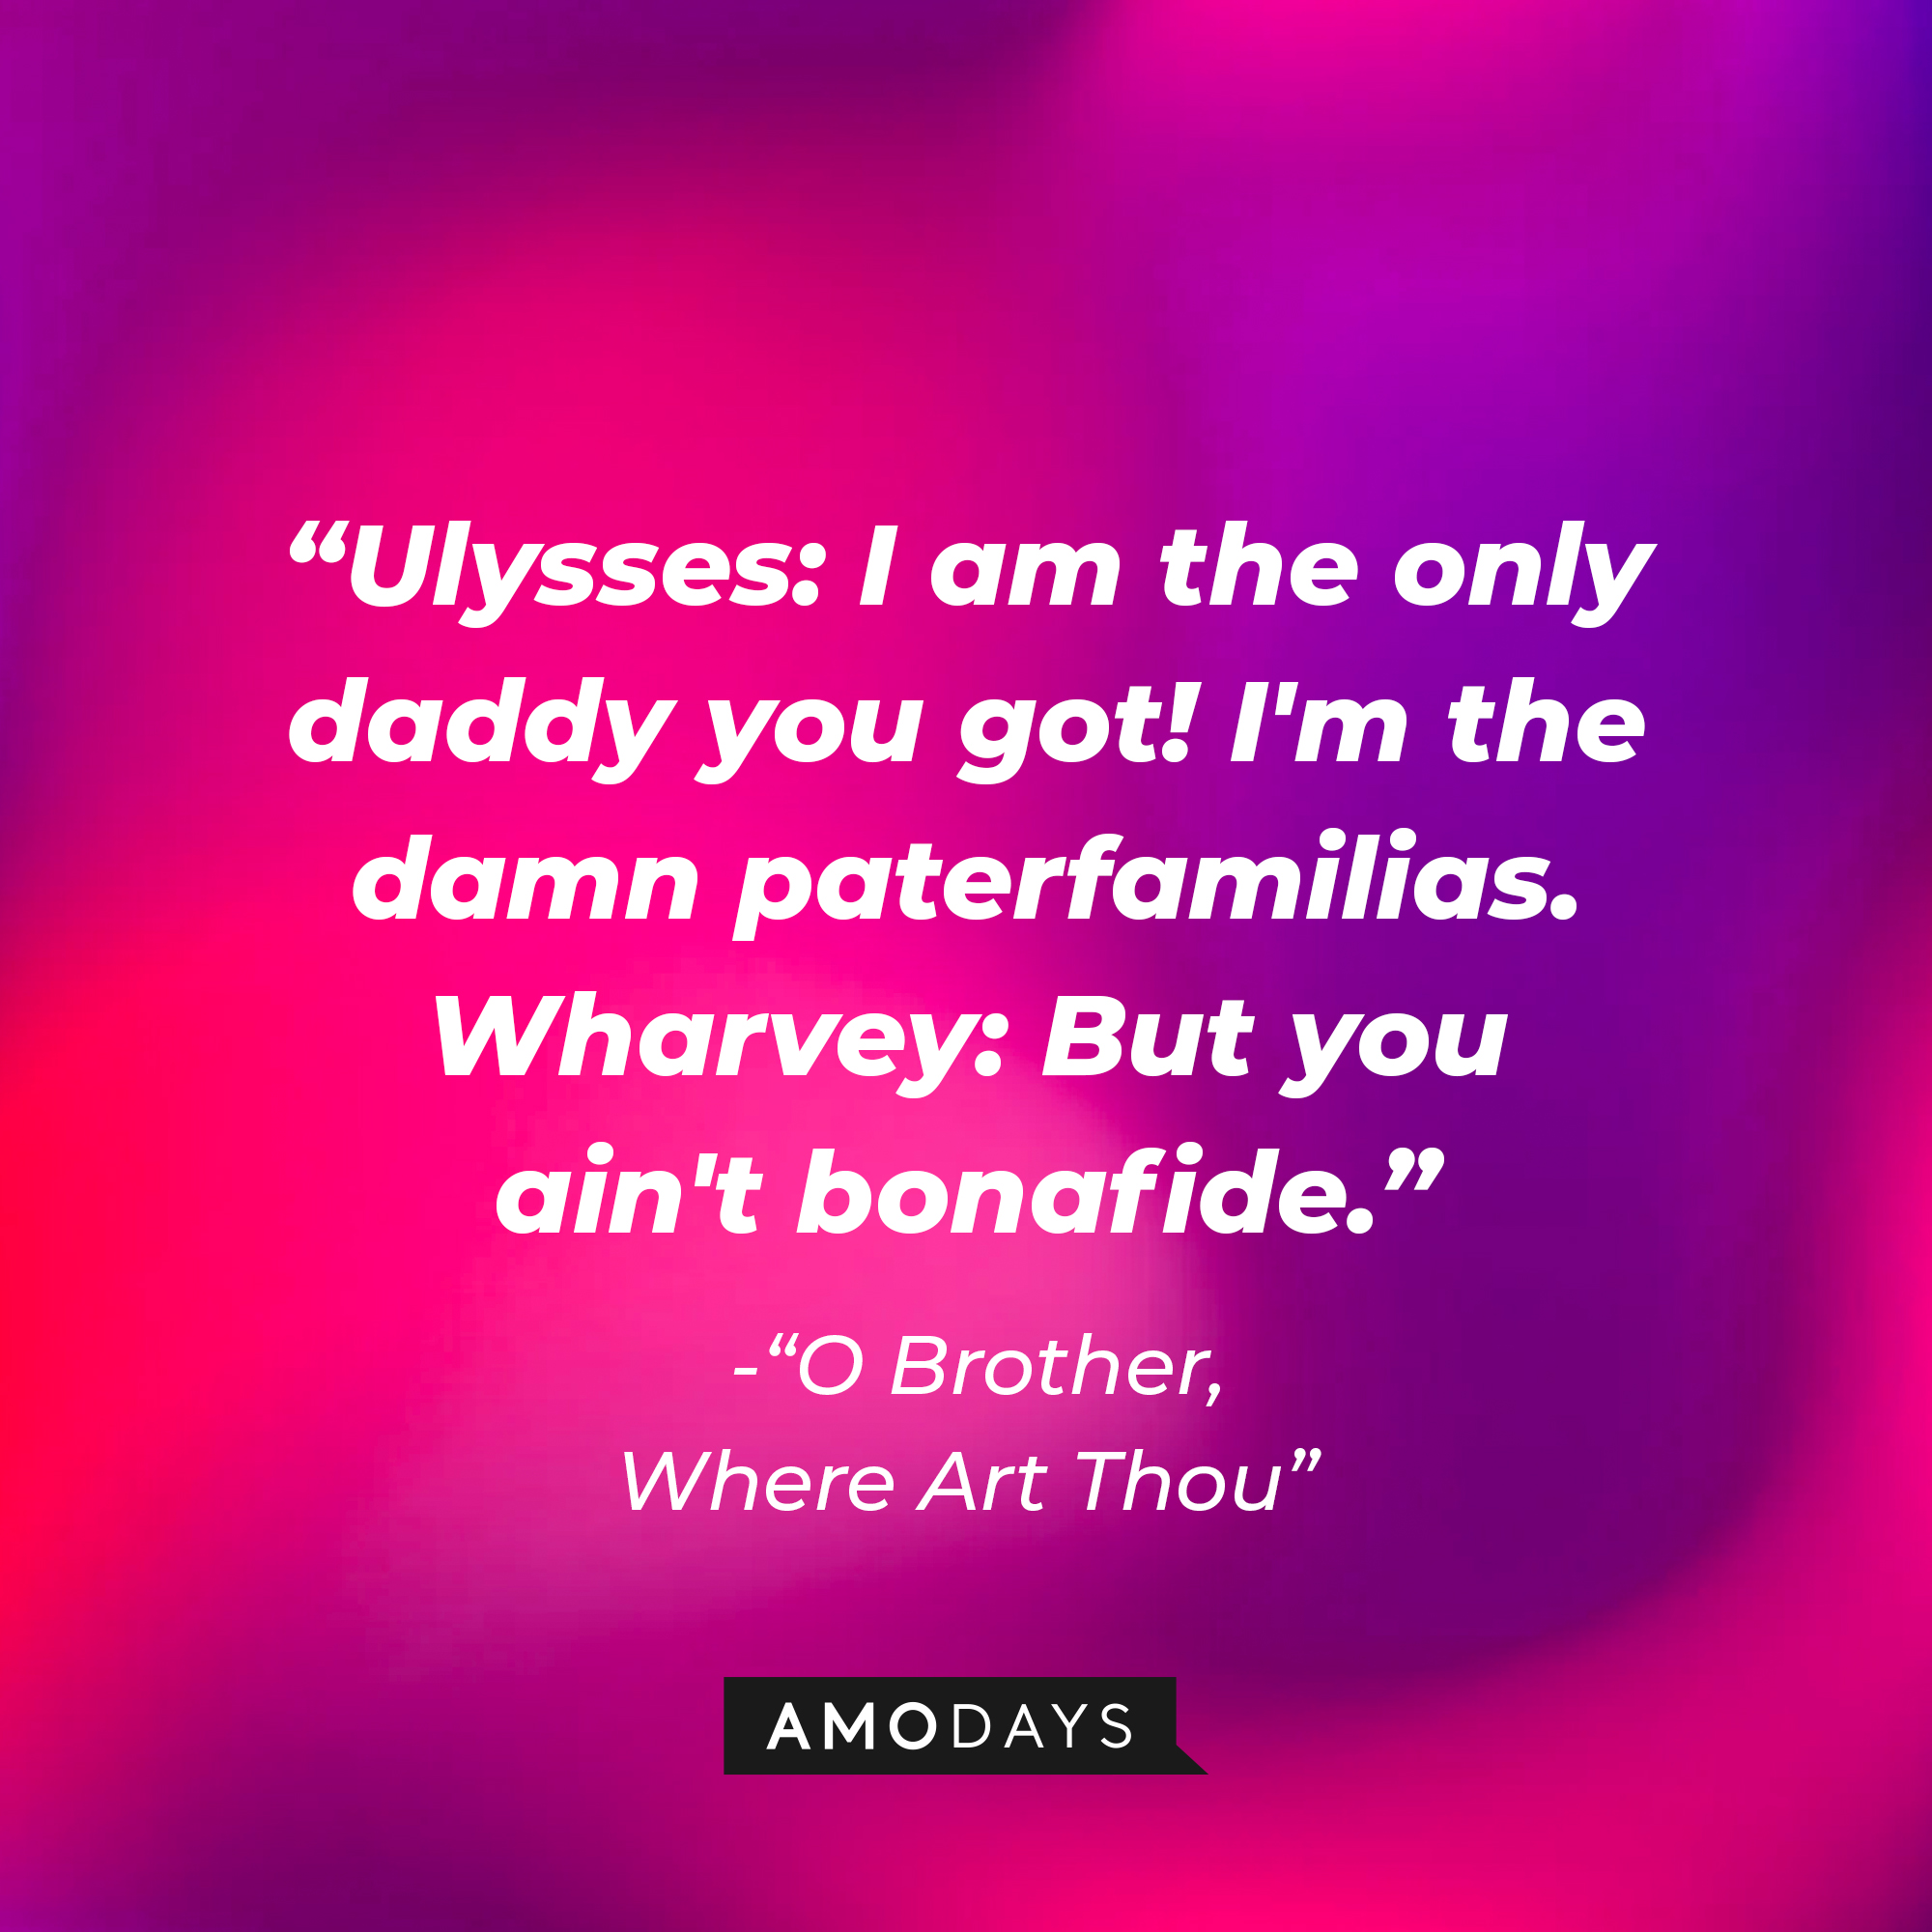 Ulysses Everett McGill's dialogue in "O Brother, Where Art Thou:" "Ulysses: I am the only daddy you got! I'm the damn paterfamilias. ; Wharvey: But you ain't bonafide." | Source: AmoDays